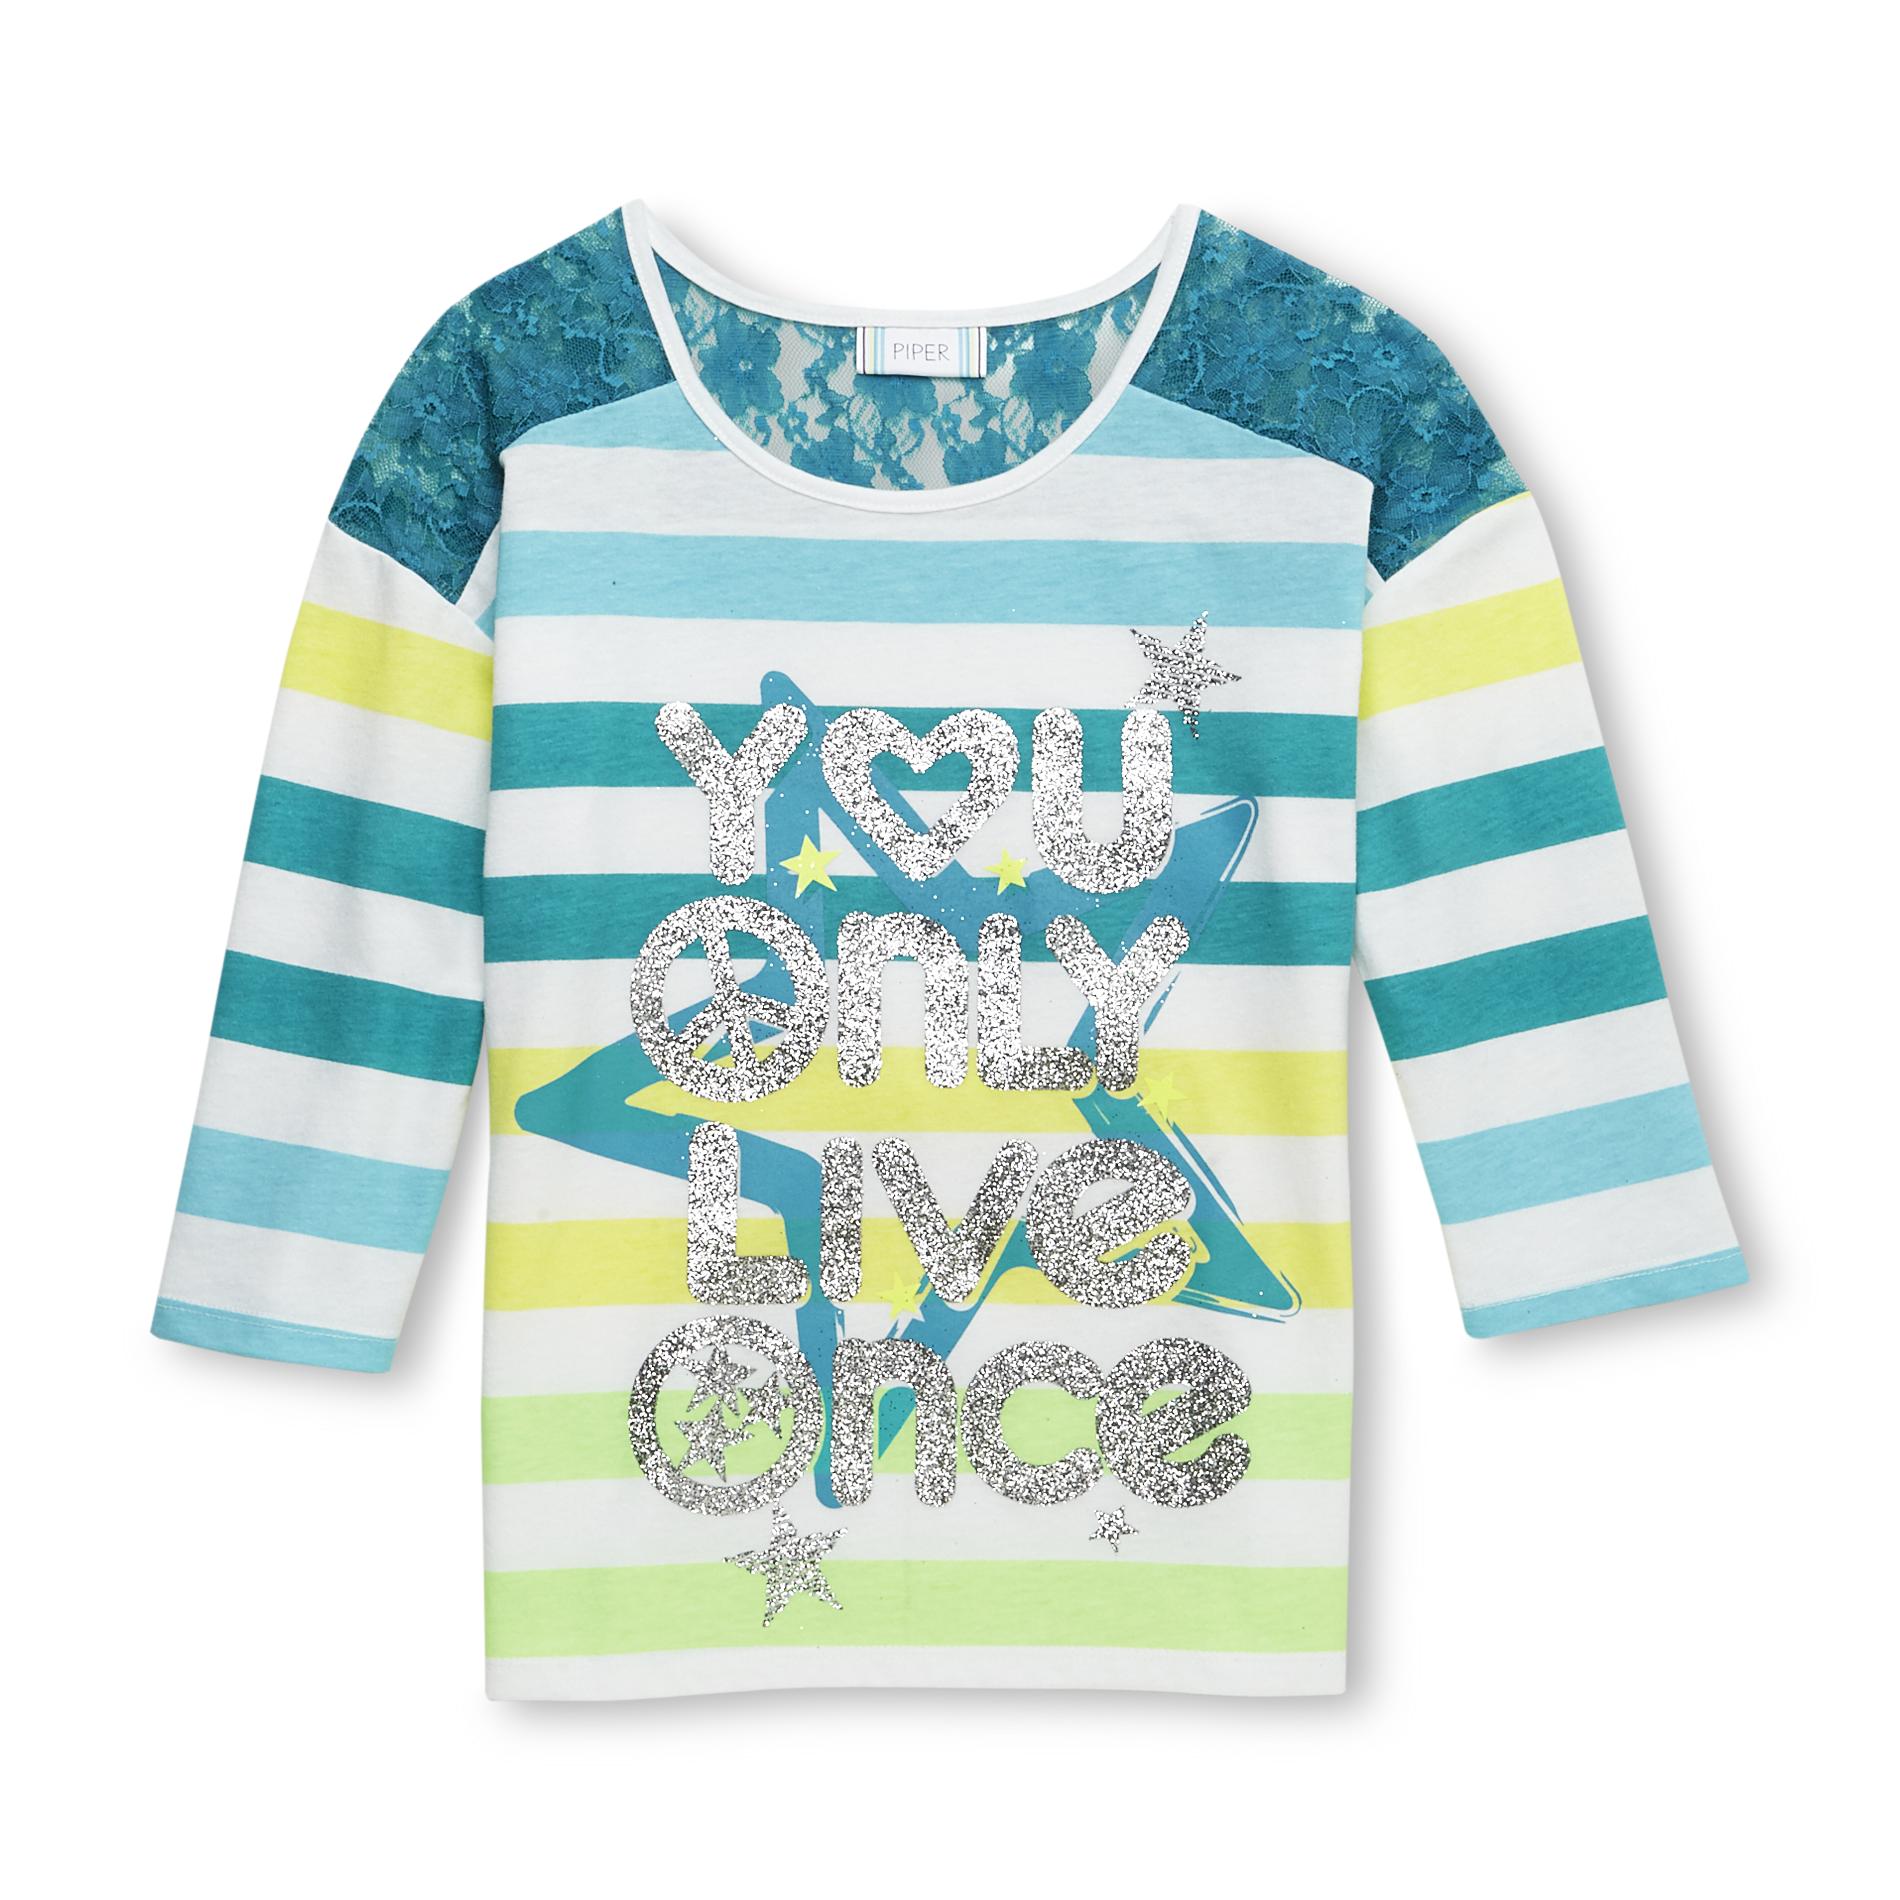 Piper Girl's Lace Yoke Top - You Only Live Once